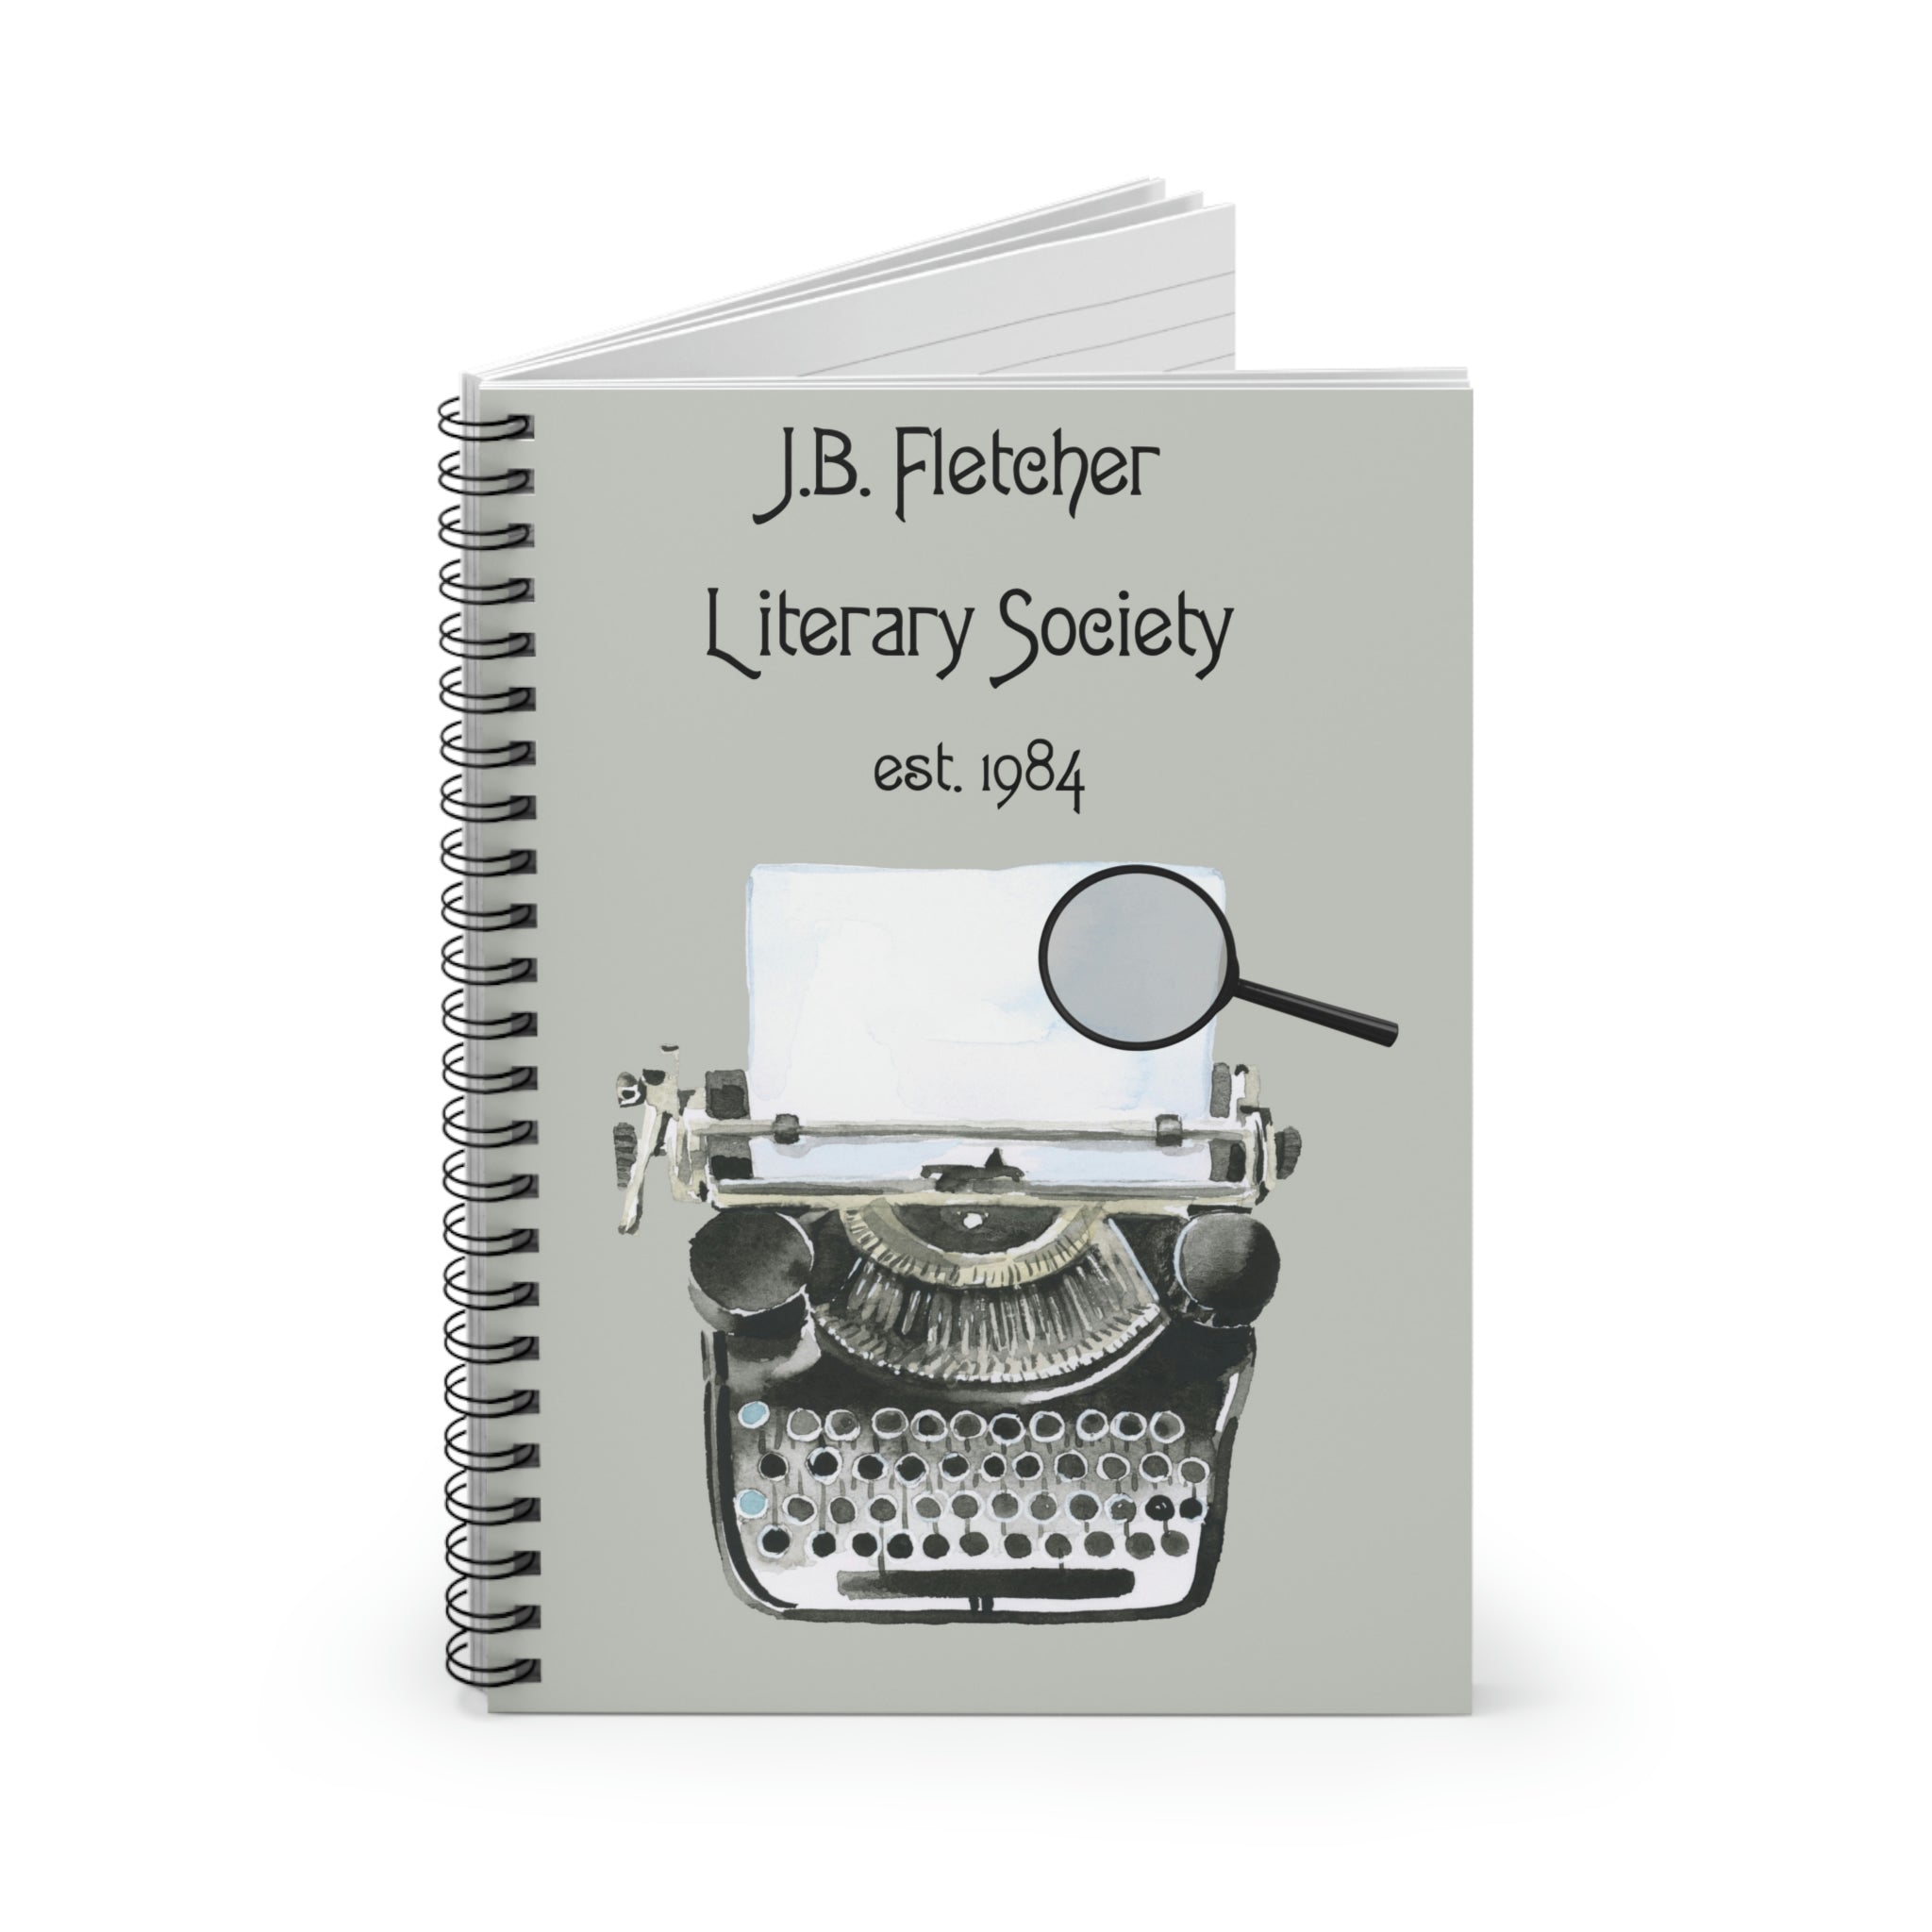 J.B. Fletcher Literary Society Ruled Line Notebook, Standing up partially opened view